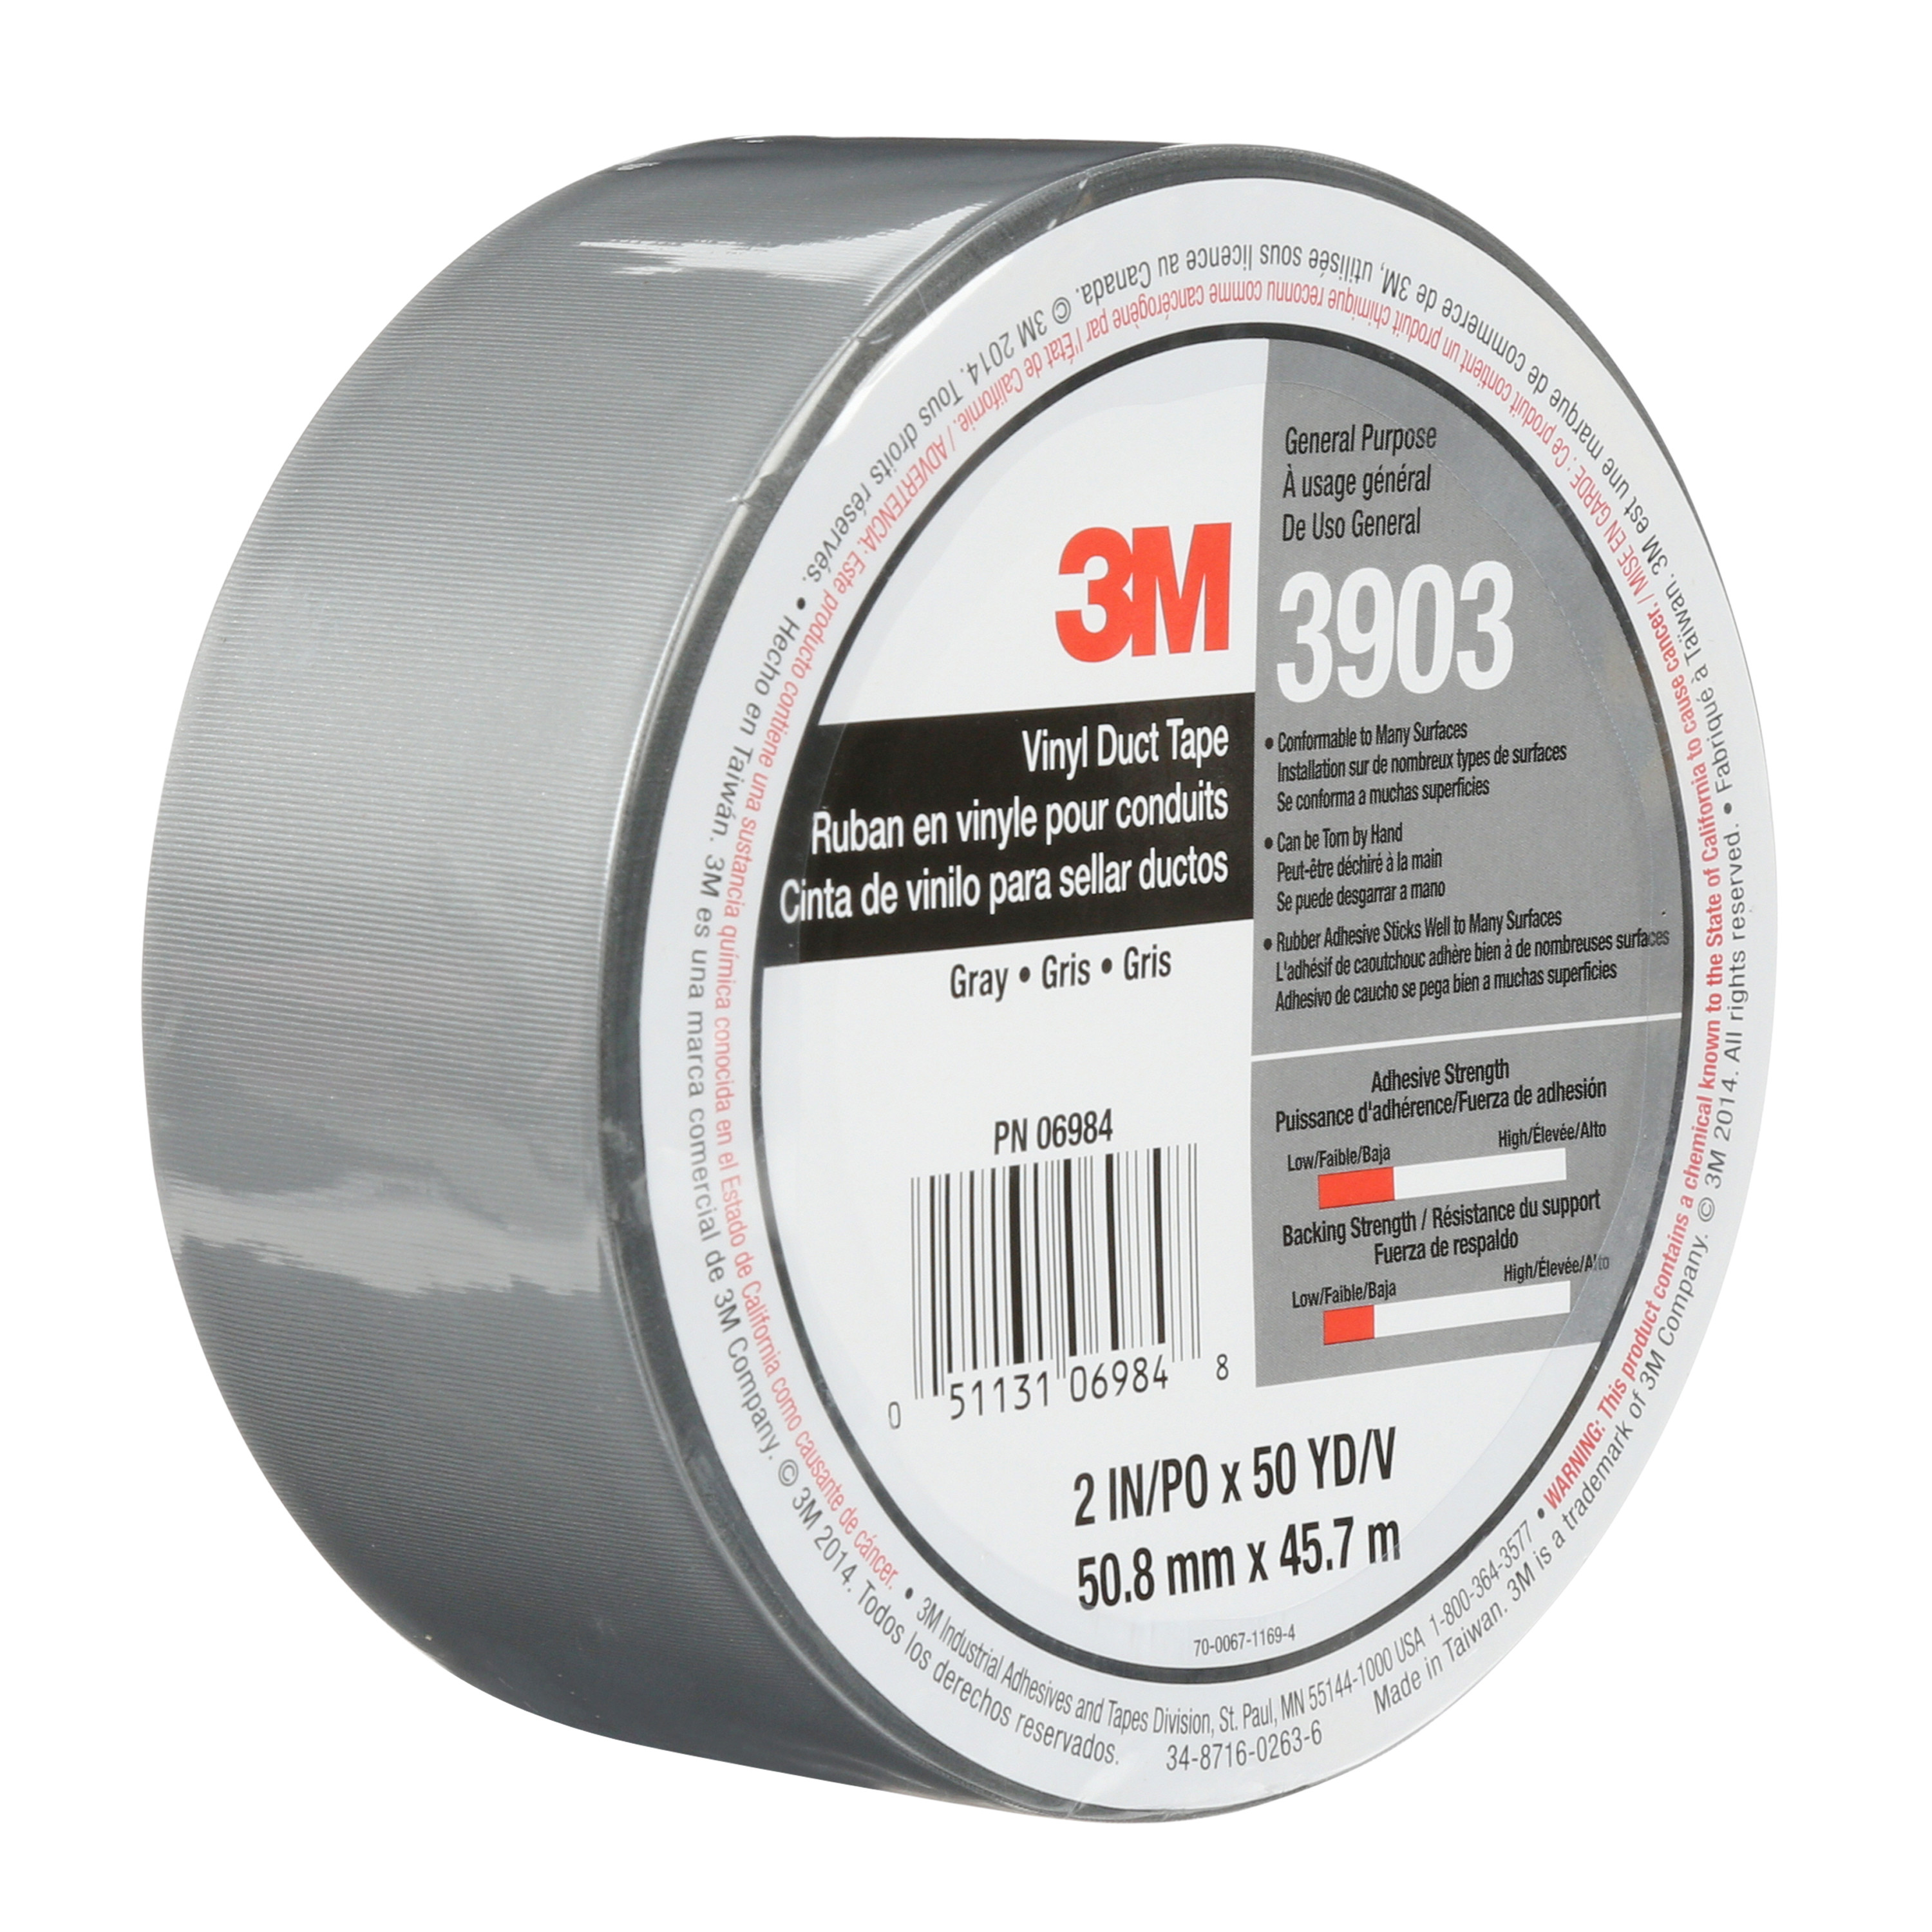 3M™ Vinyl Duct Tape 3903, Gray, 2 in x 50 yd 6.5 mil, 24 per case,
Individually Wrapped Conveniently Packaged